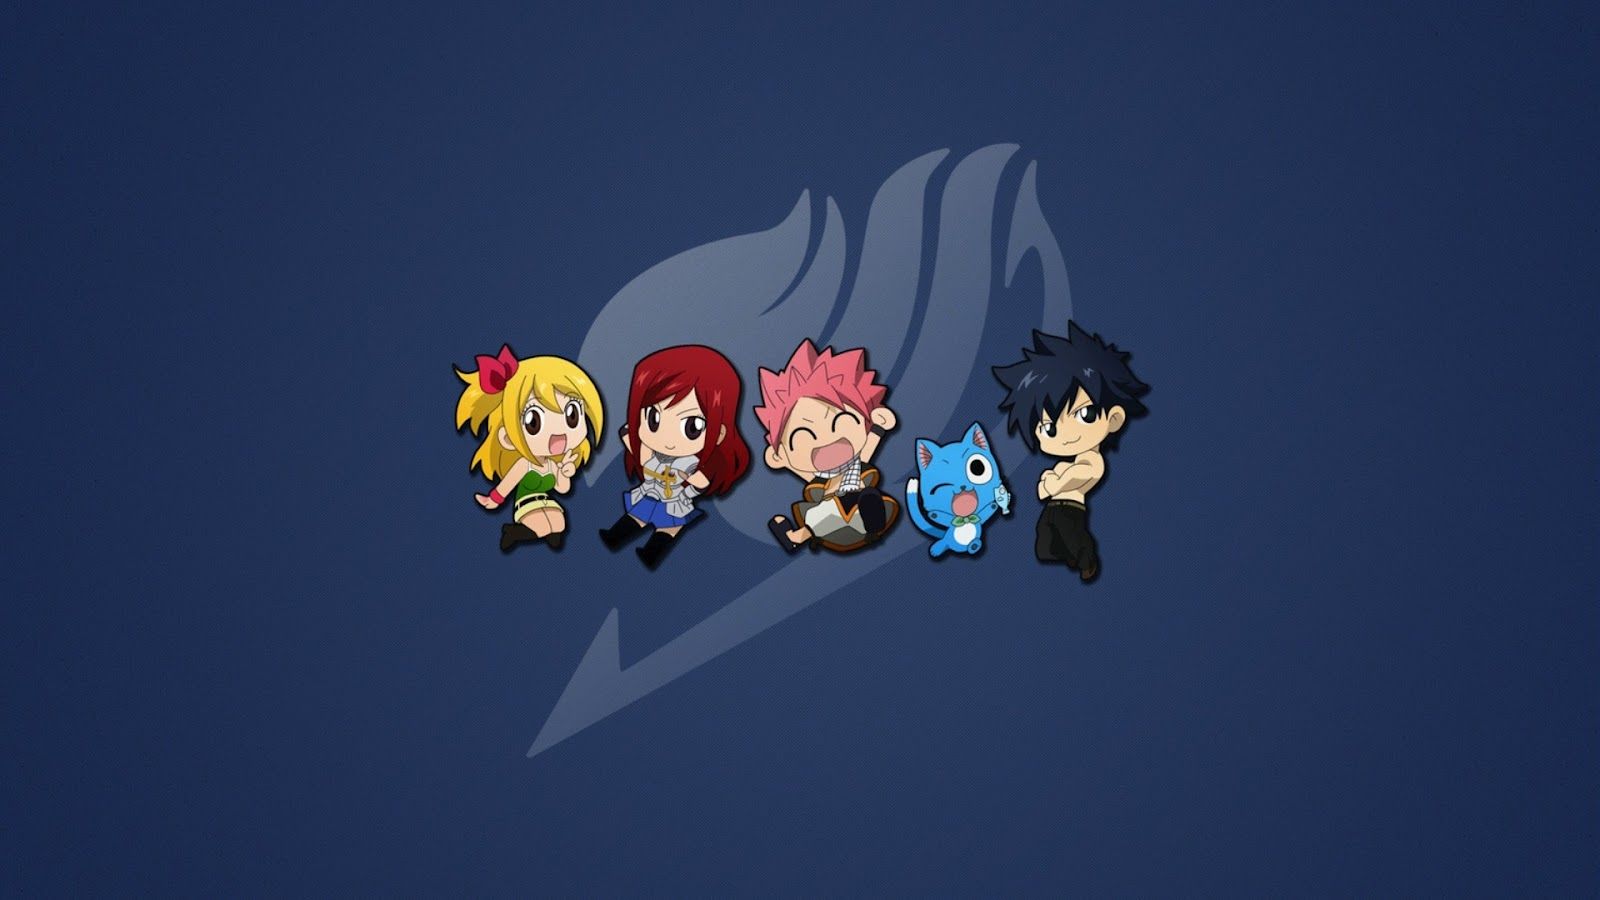 Fairy tail hd wallpapers